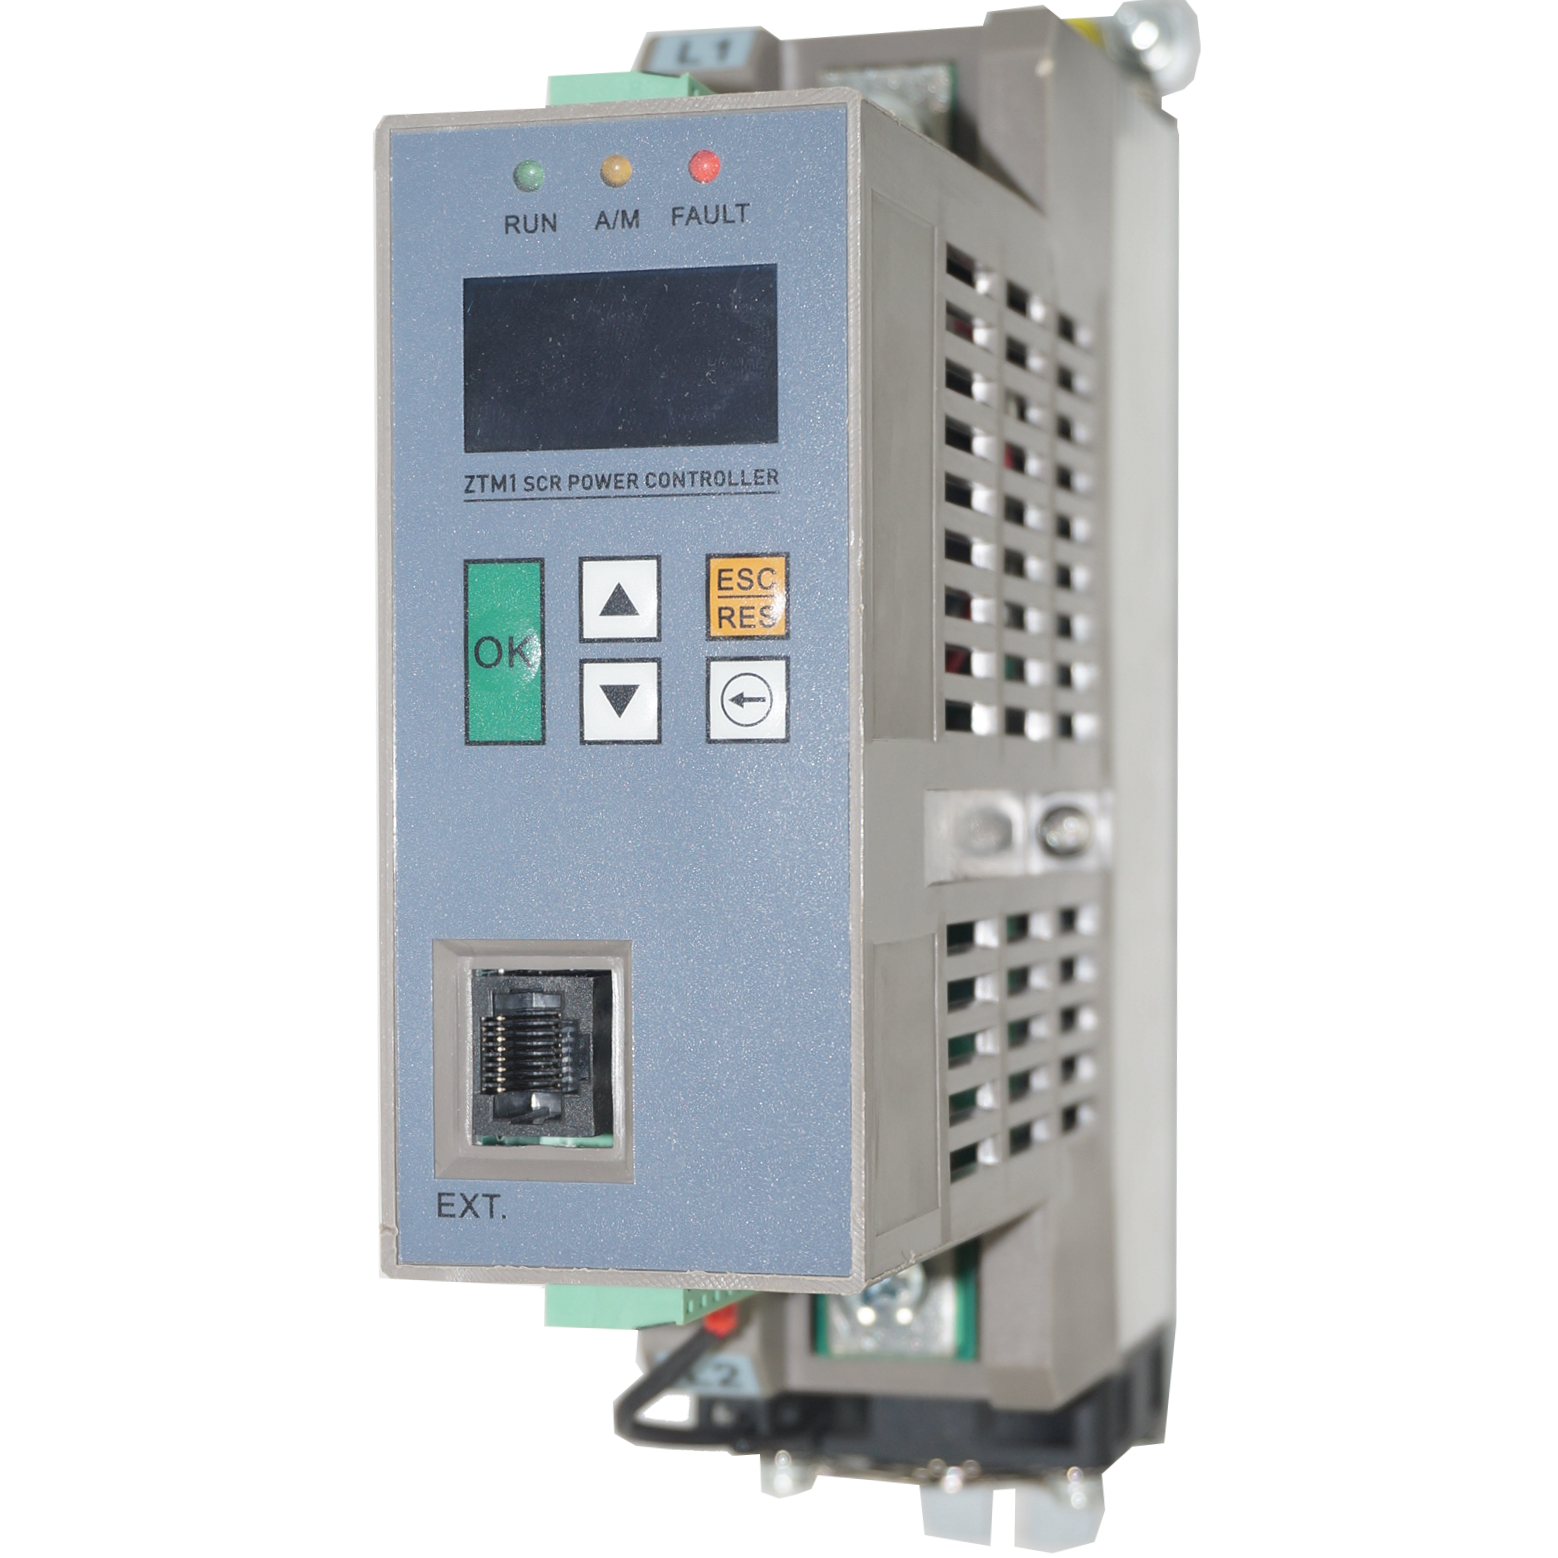 FTM1-A20-V2-W0, Single Phase, Phase Angle/Burst Controller for Primary Control of Transformer (Phase Angle mode only), Voltage/Current/Power Limit Modes, For Single Phase Loads, 230VAC, 16 Amps @ 50 Deg C